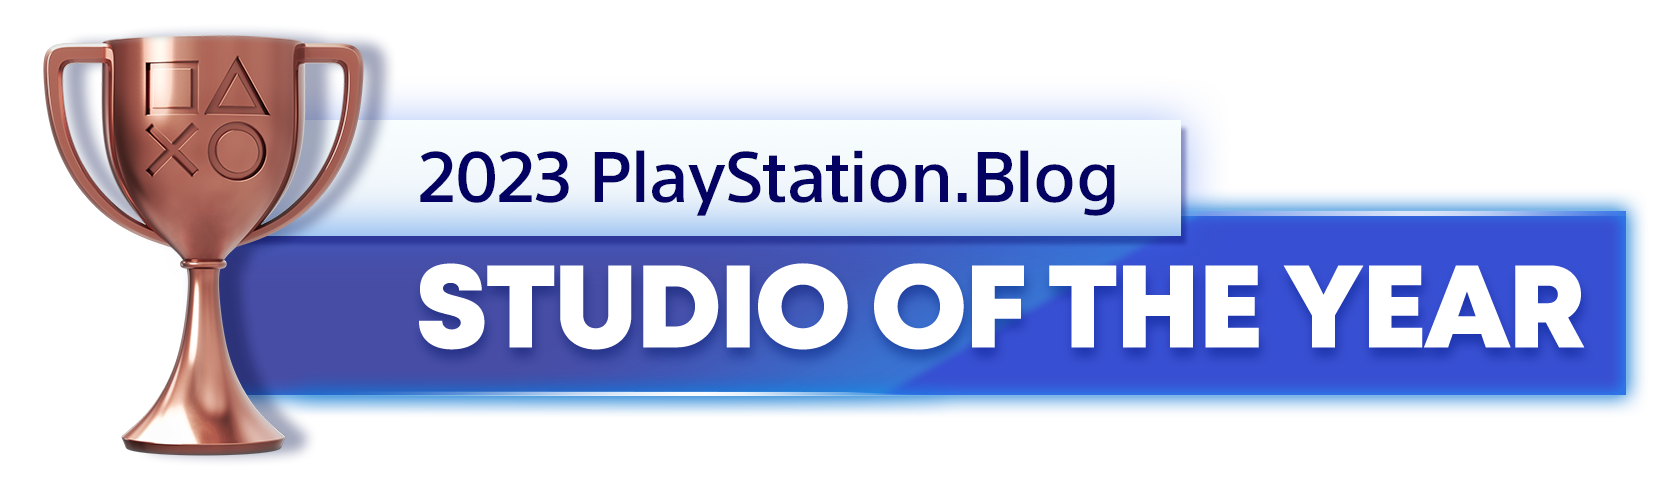  "Bronze Trophy for the 2023 PlayStation Blog Studio of the Year Winner"